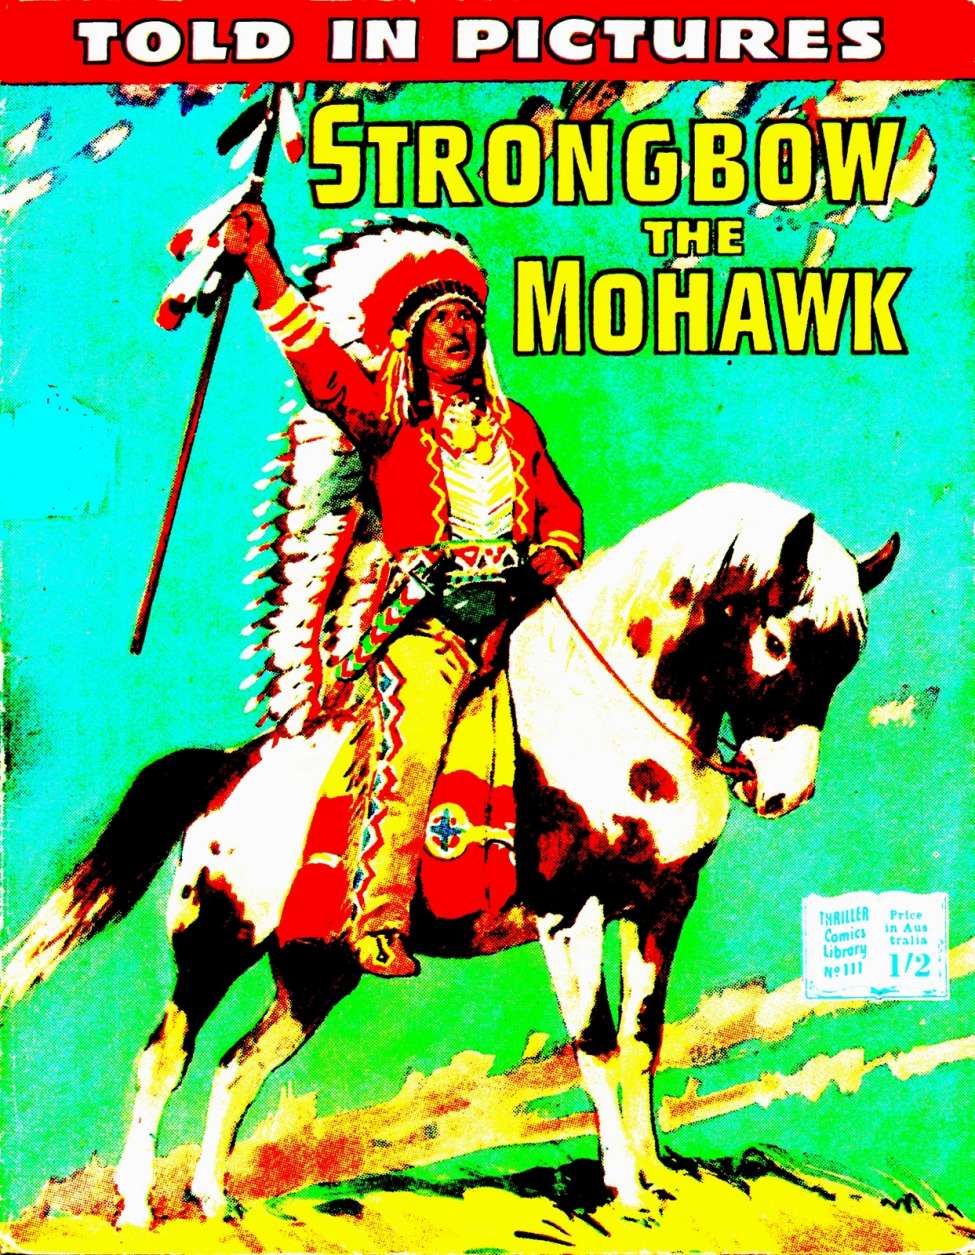 Book Cover For Thriller Comics Library 111 - Strongbow the Mohawk